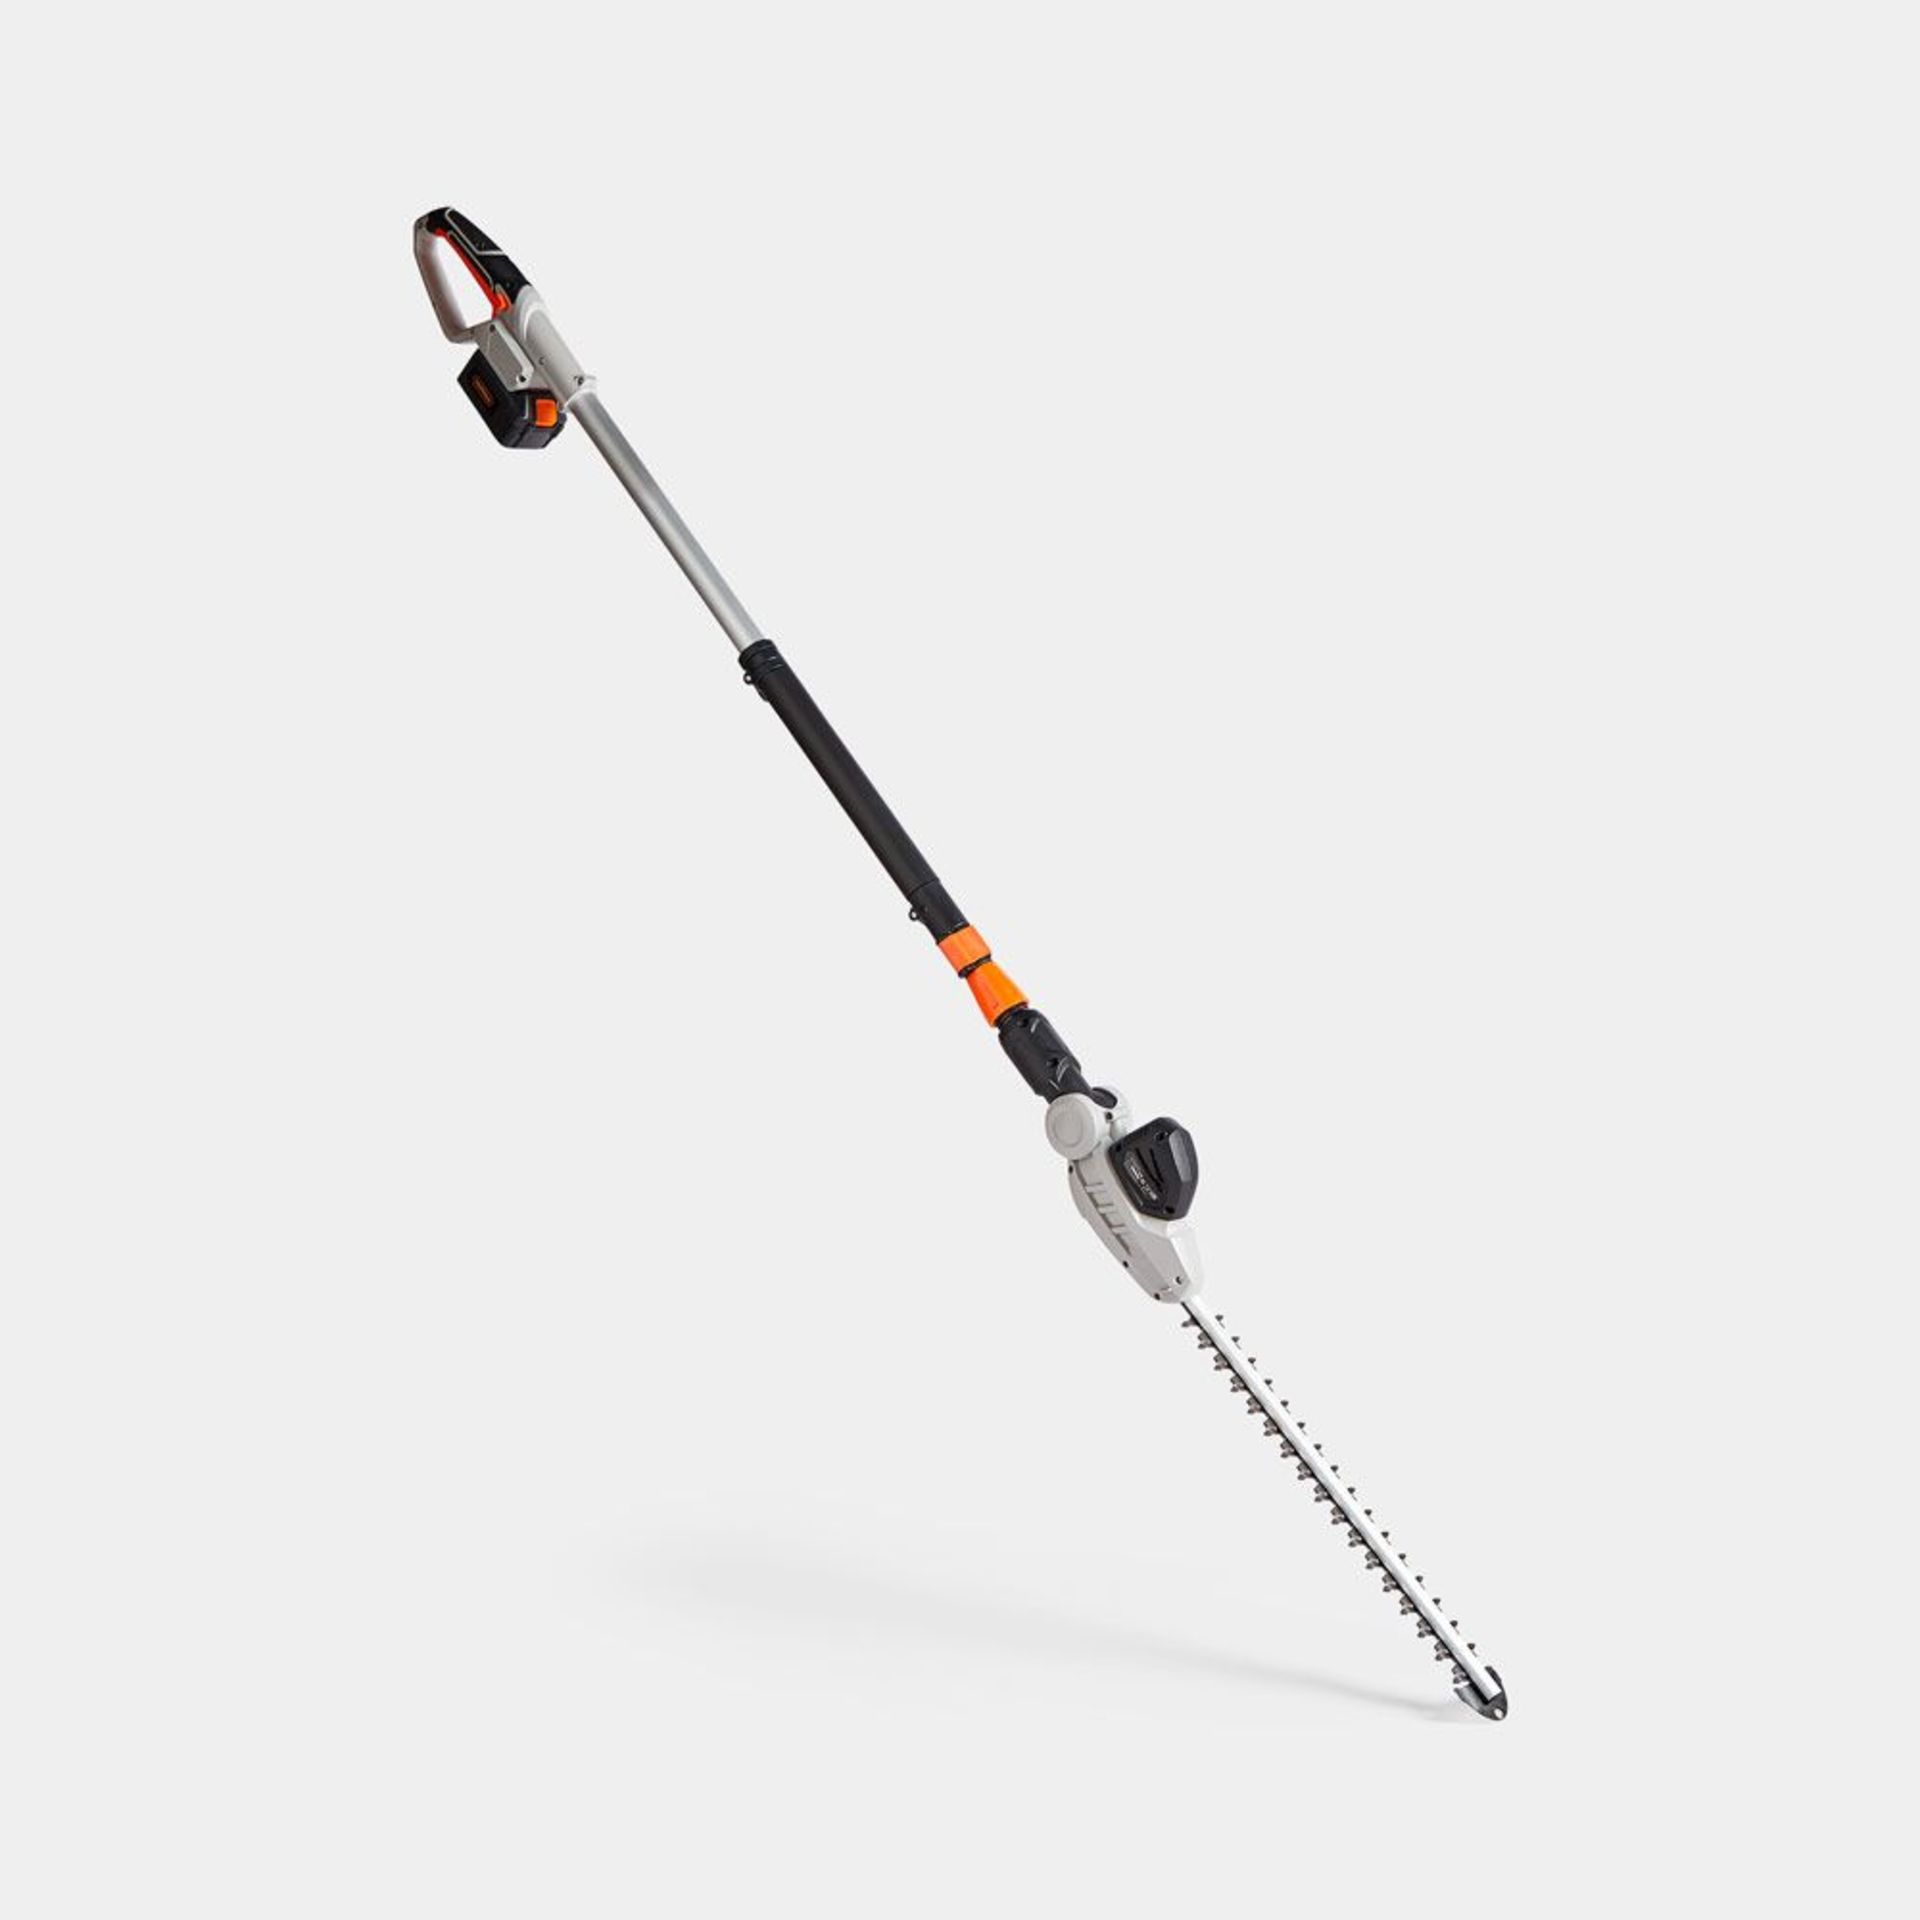 40V Cordless Pole Hedge Trimmer. - S2. With a high-powered 40V battery, trim your garden with